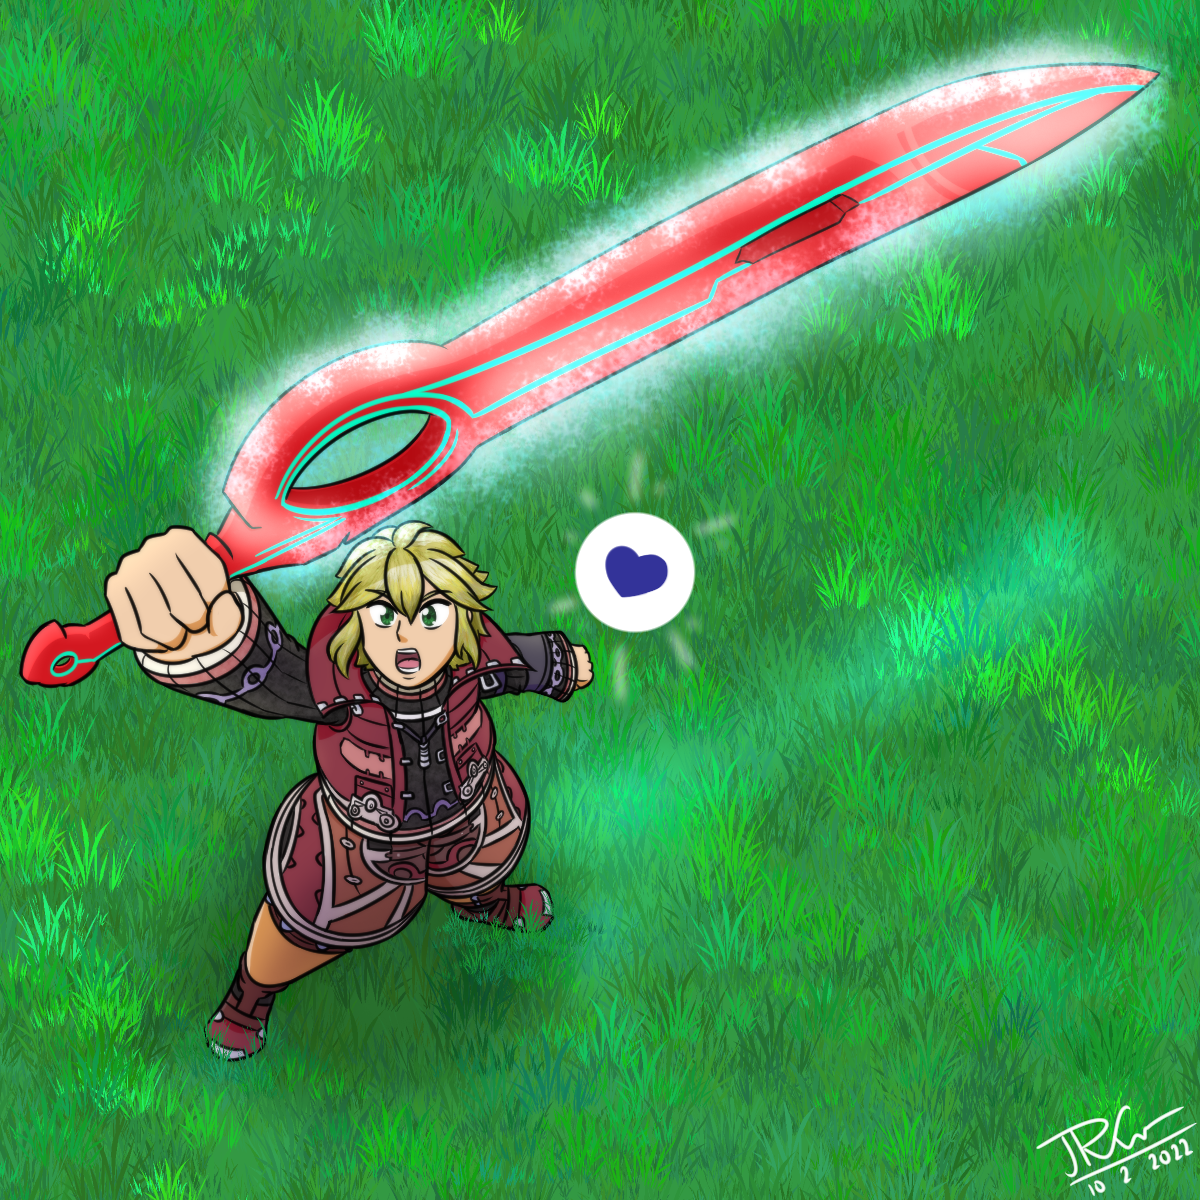 A from Xenoblade Chronicles 3: Future Redeemed by Laydos on DeviantArt